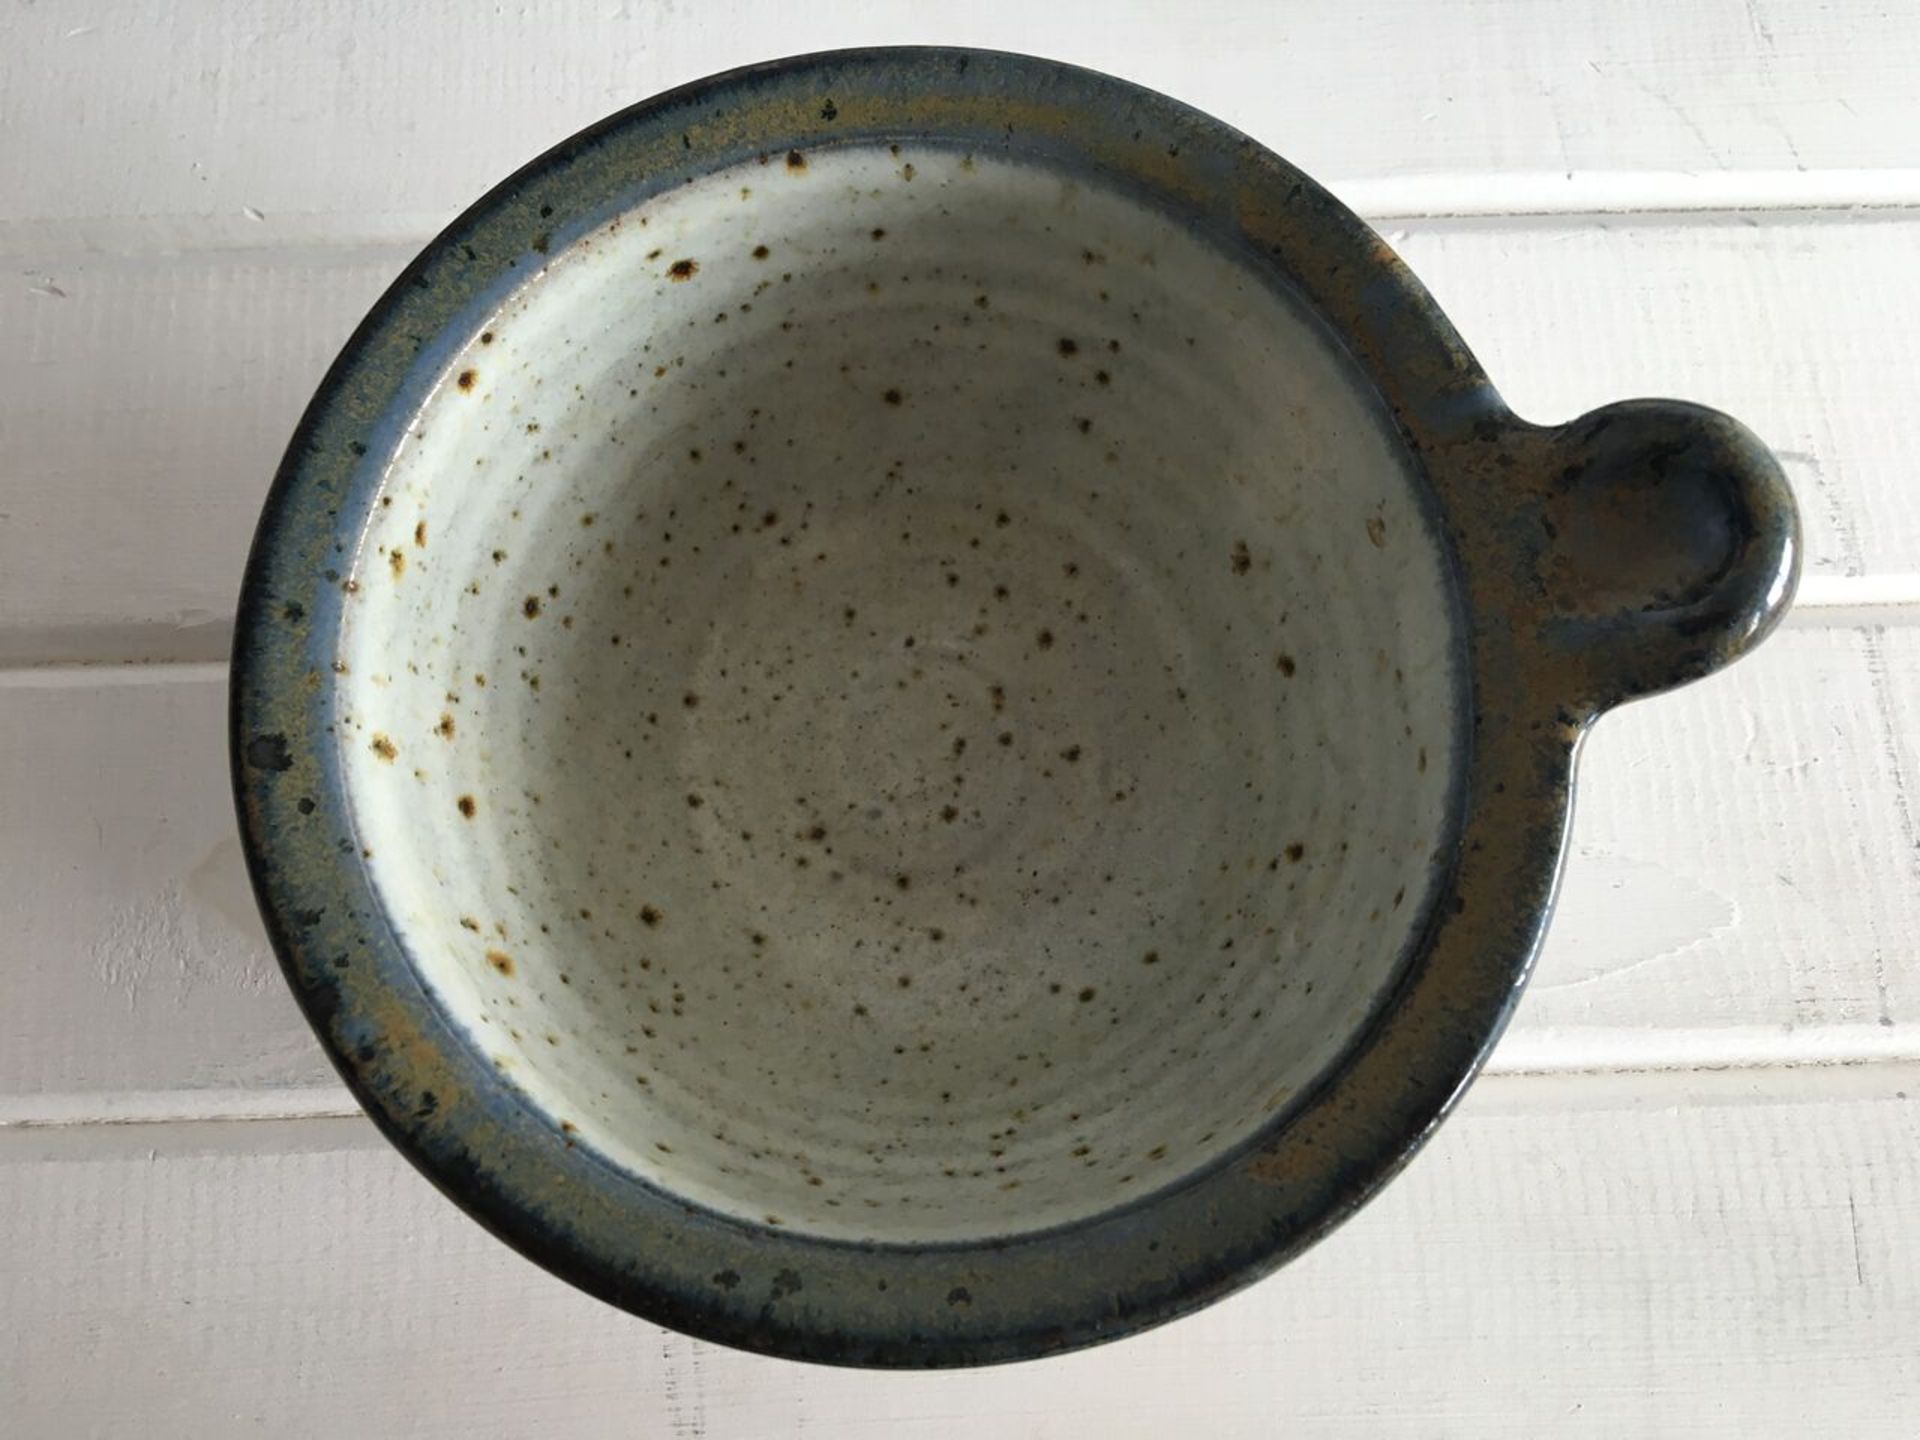 GROUP OF THREE UNSIGNED STUDIO ART POTTERY BOWLS. ALL WITH NO OBVIOUS DAMAGE. FREE UK DELIVERY. NO - Image 6 of 7